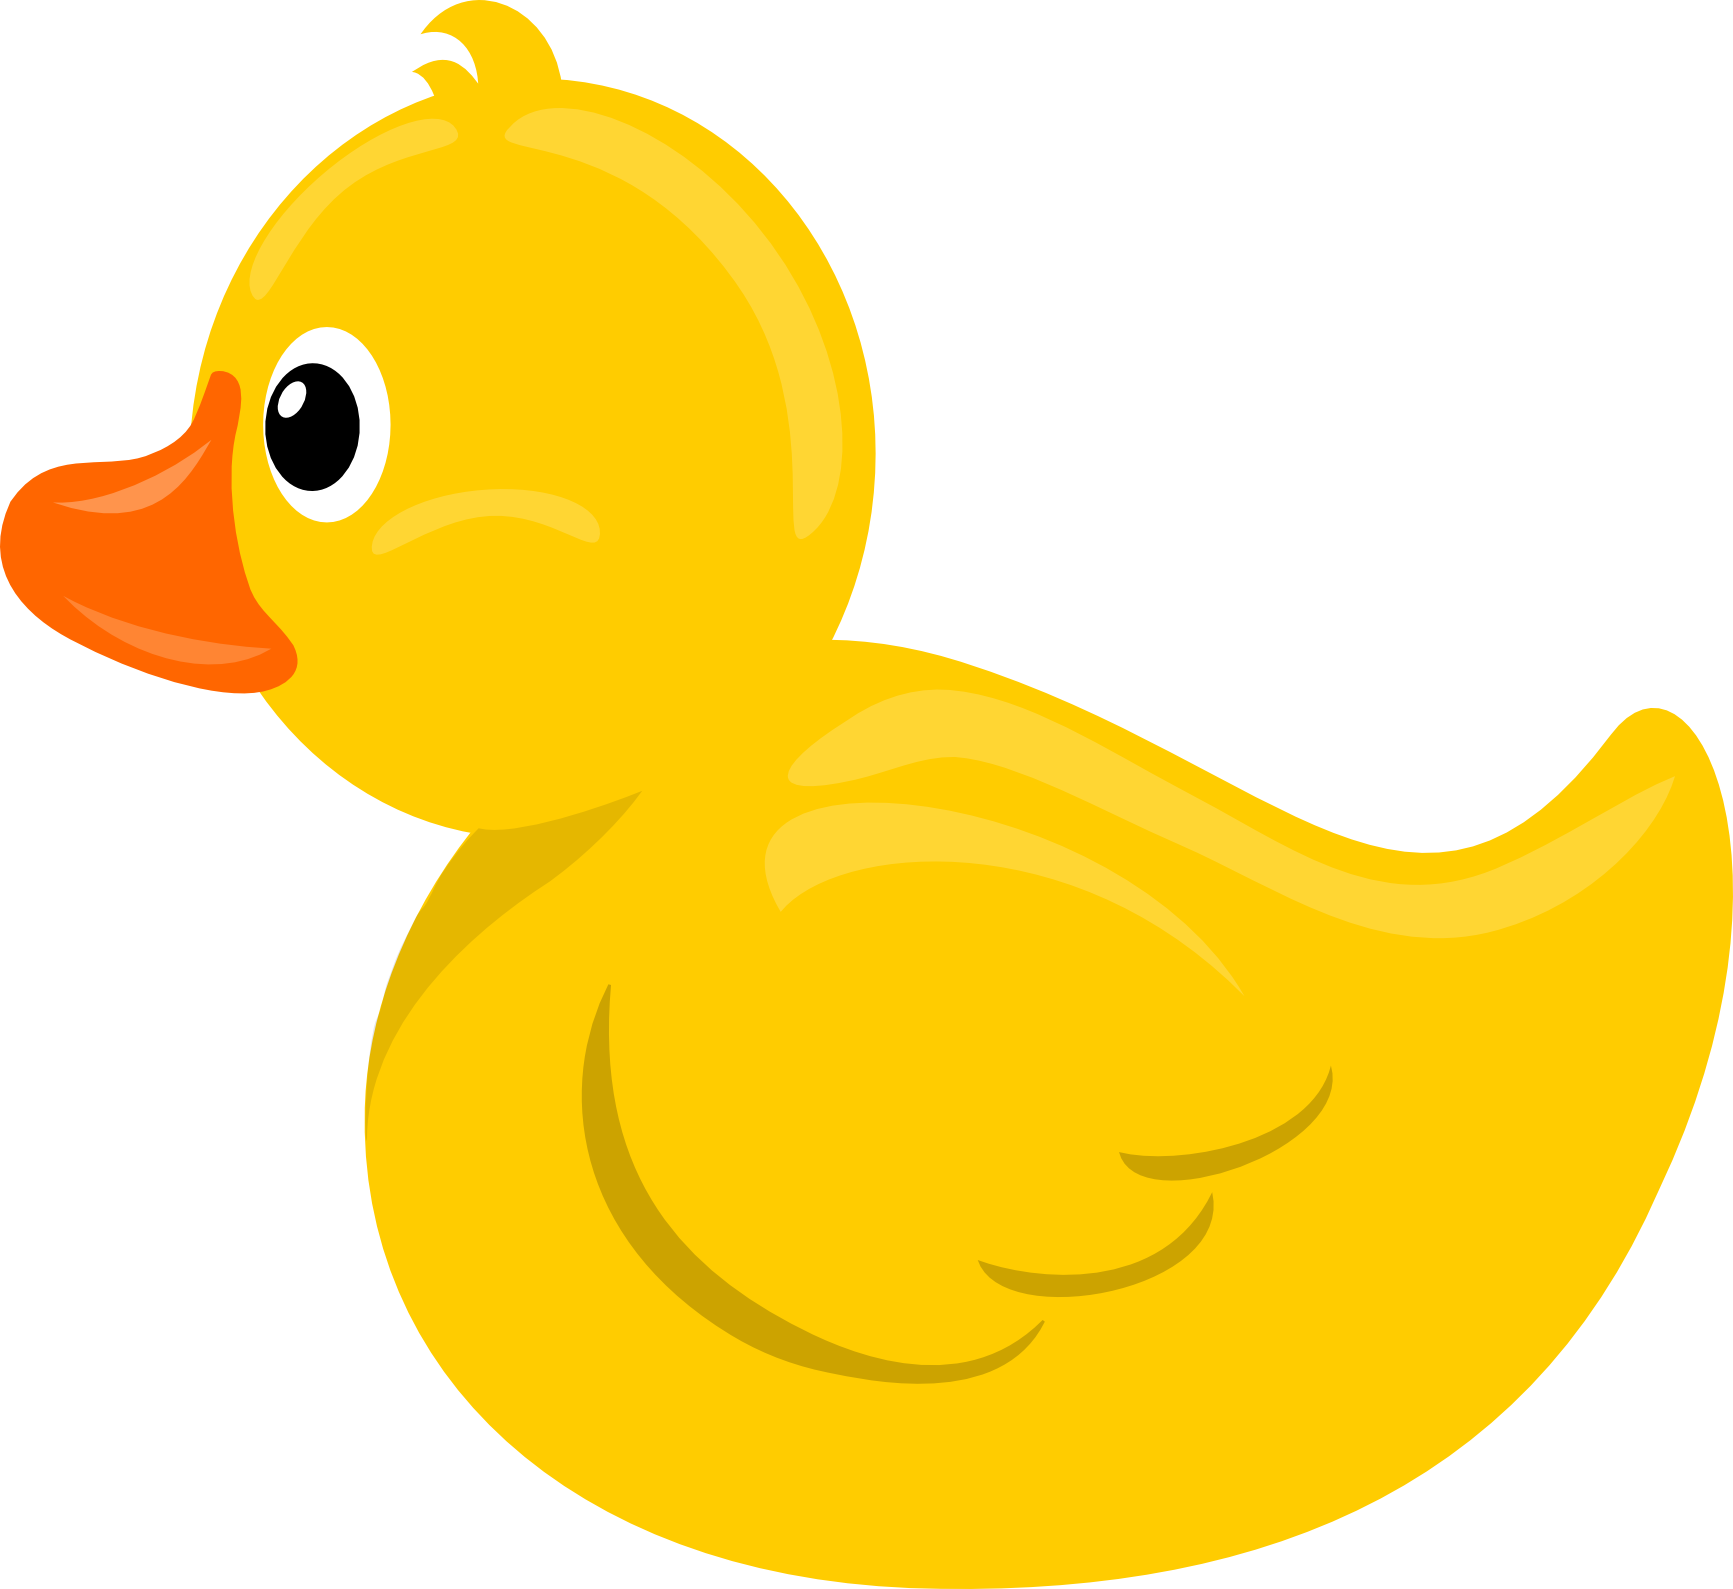 yellow duckling clipart - photo #13